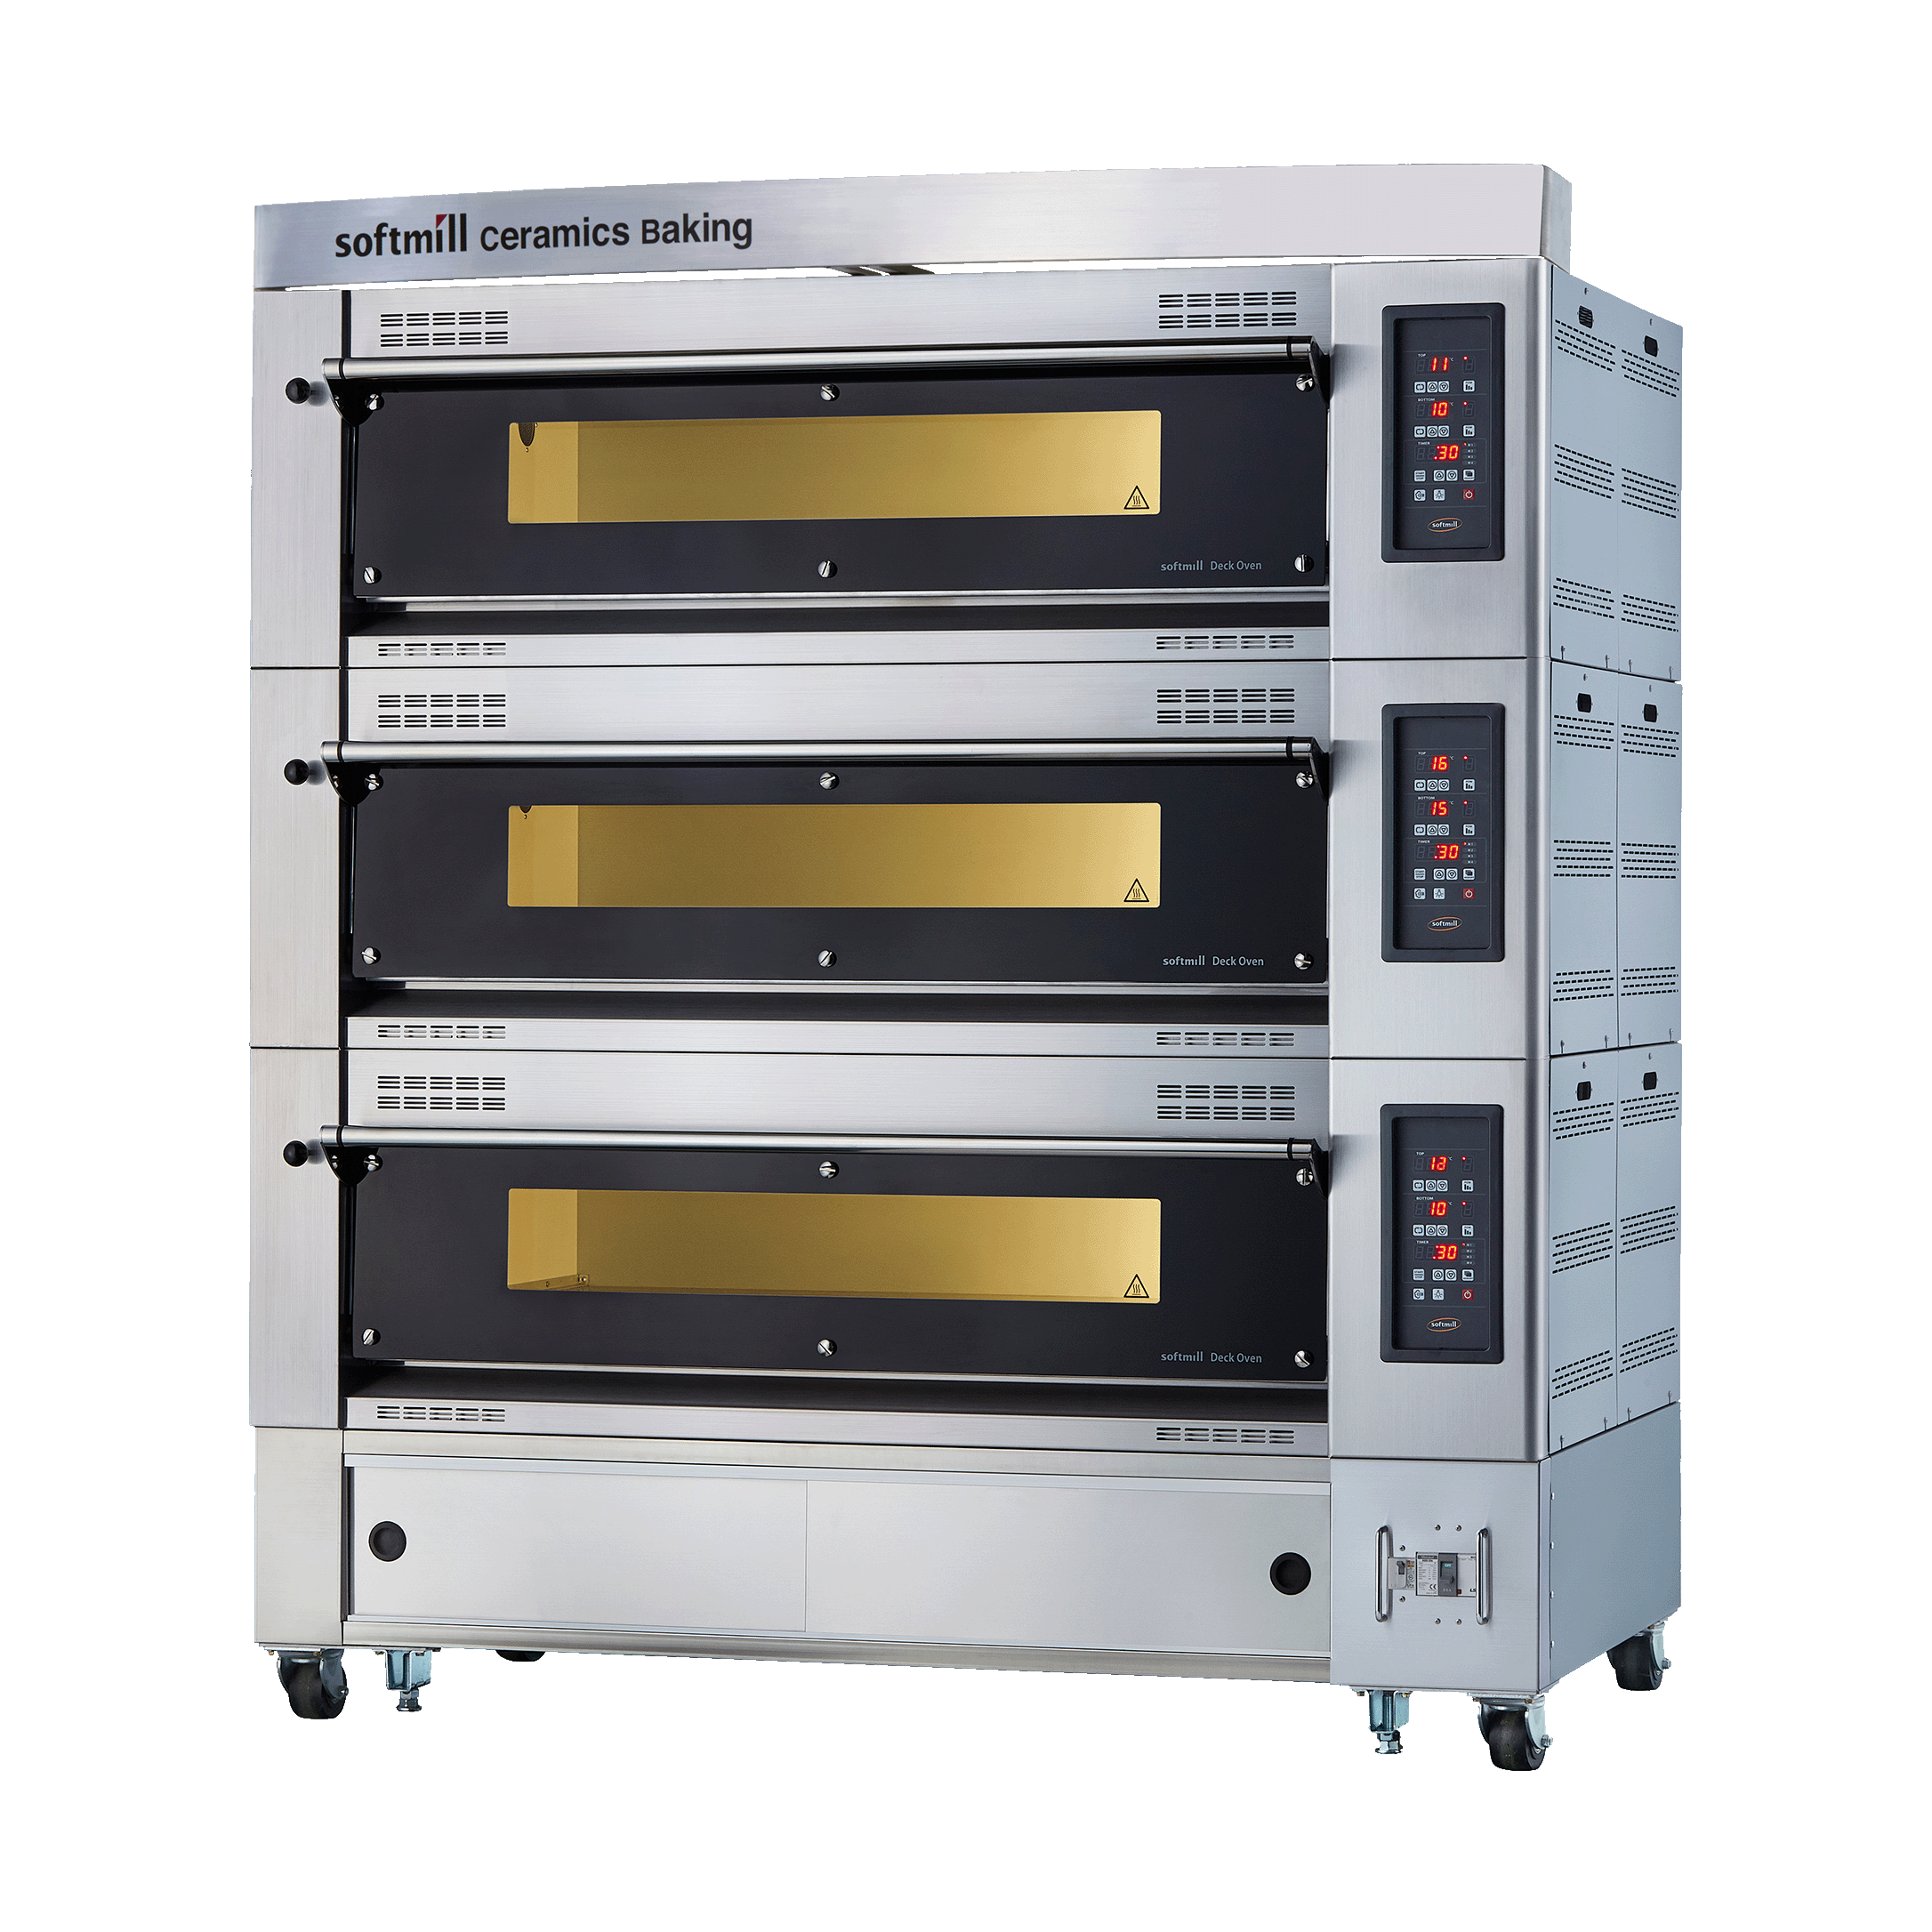 Deck Oven-G 4 trays 3 tiers main carousel mini size images